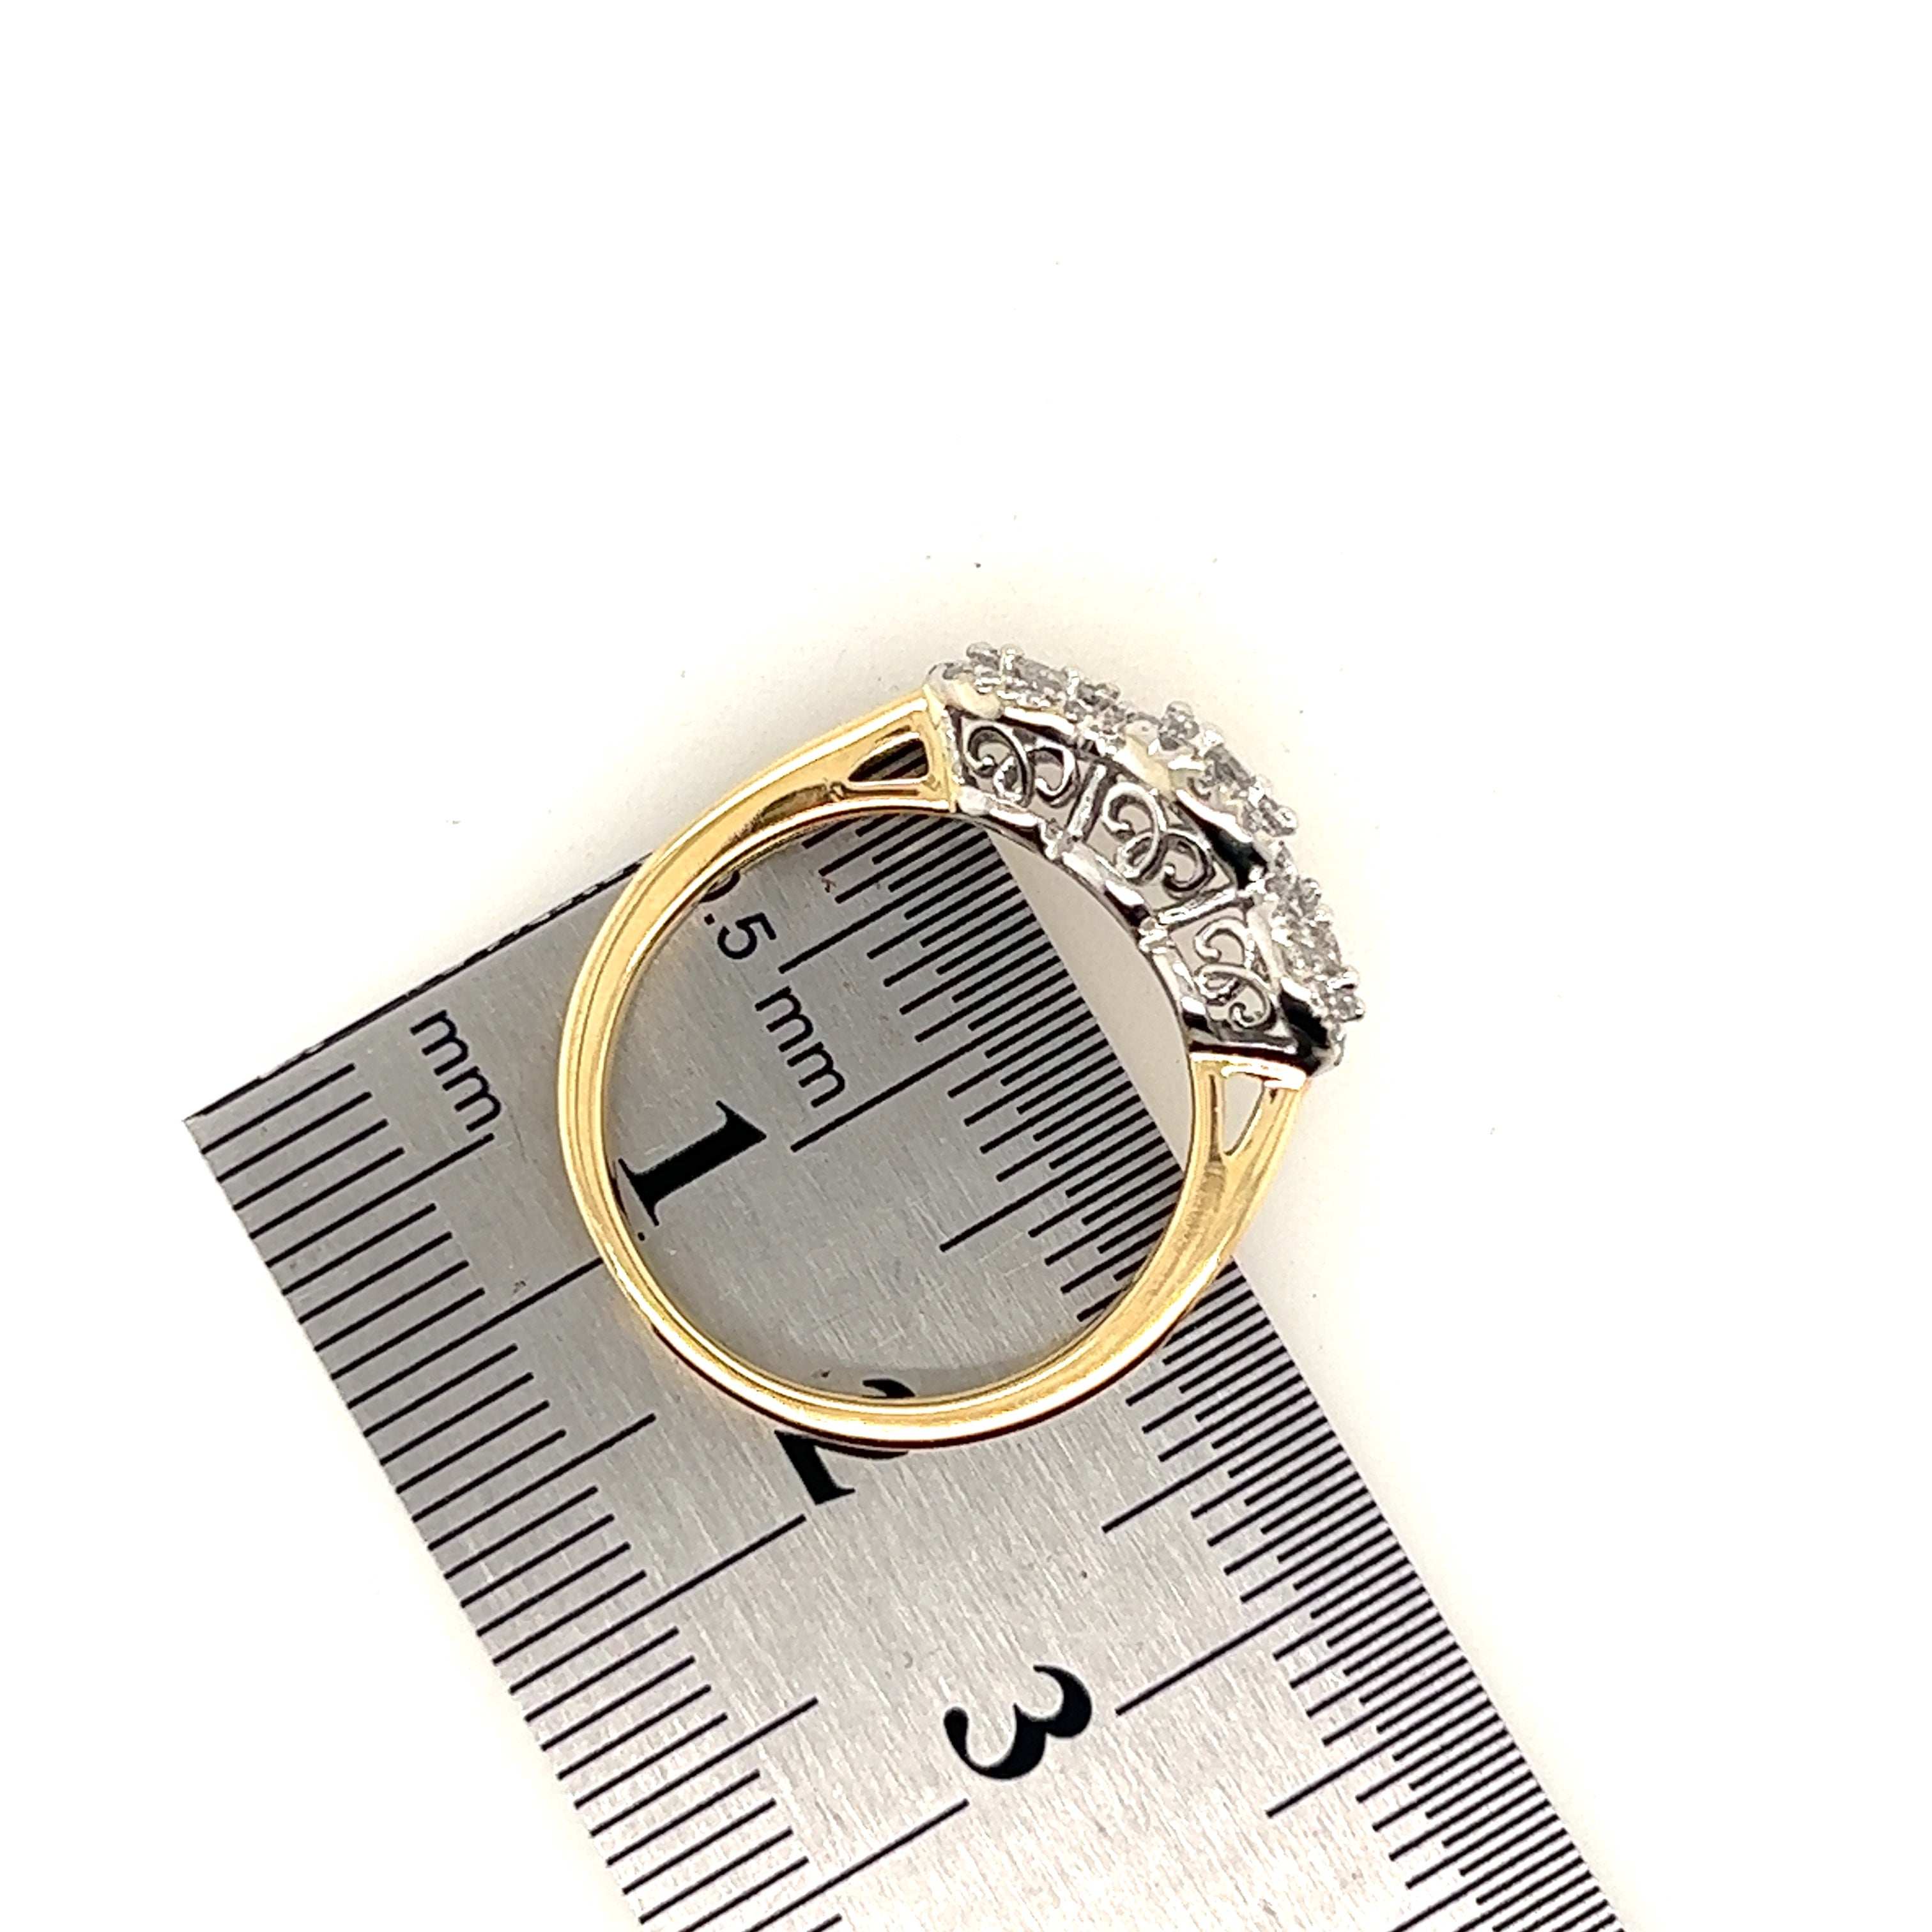 Yellow and White Gold Trilogy Style Diamond Ring